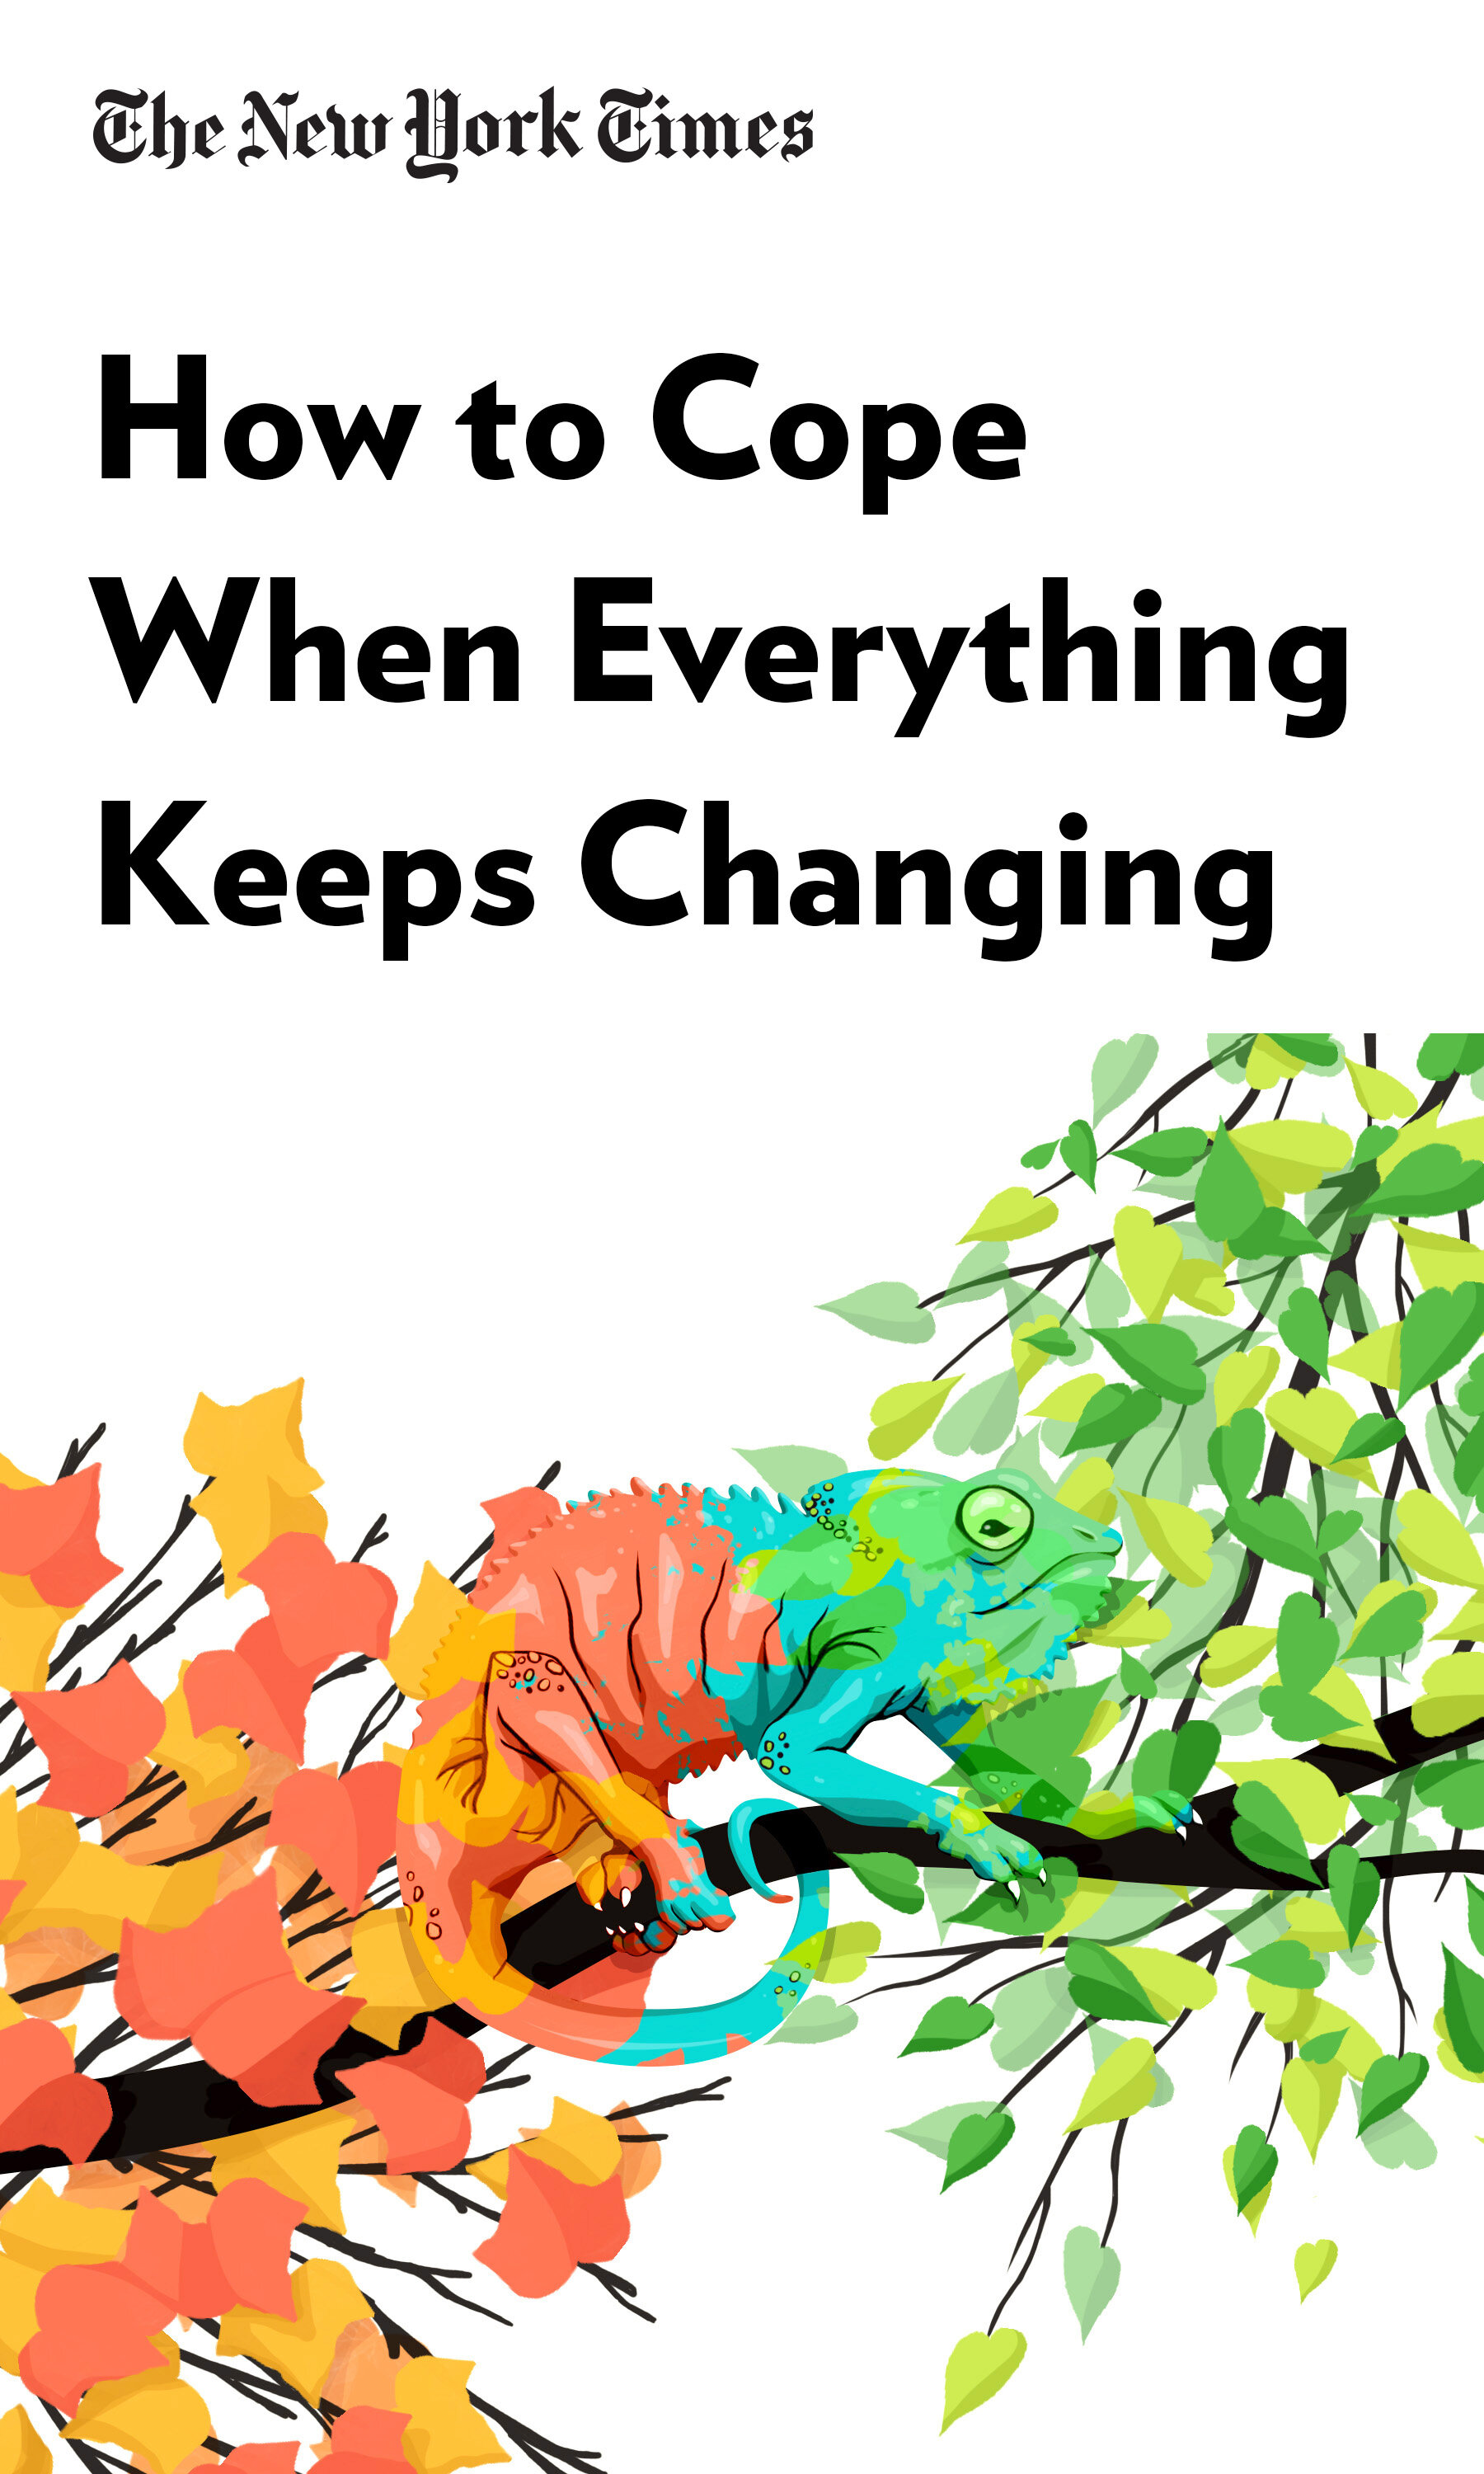 How-to-Cope-When-Everything-Keeps-Changing-eBook.jpg